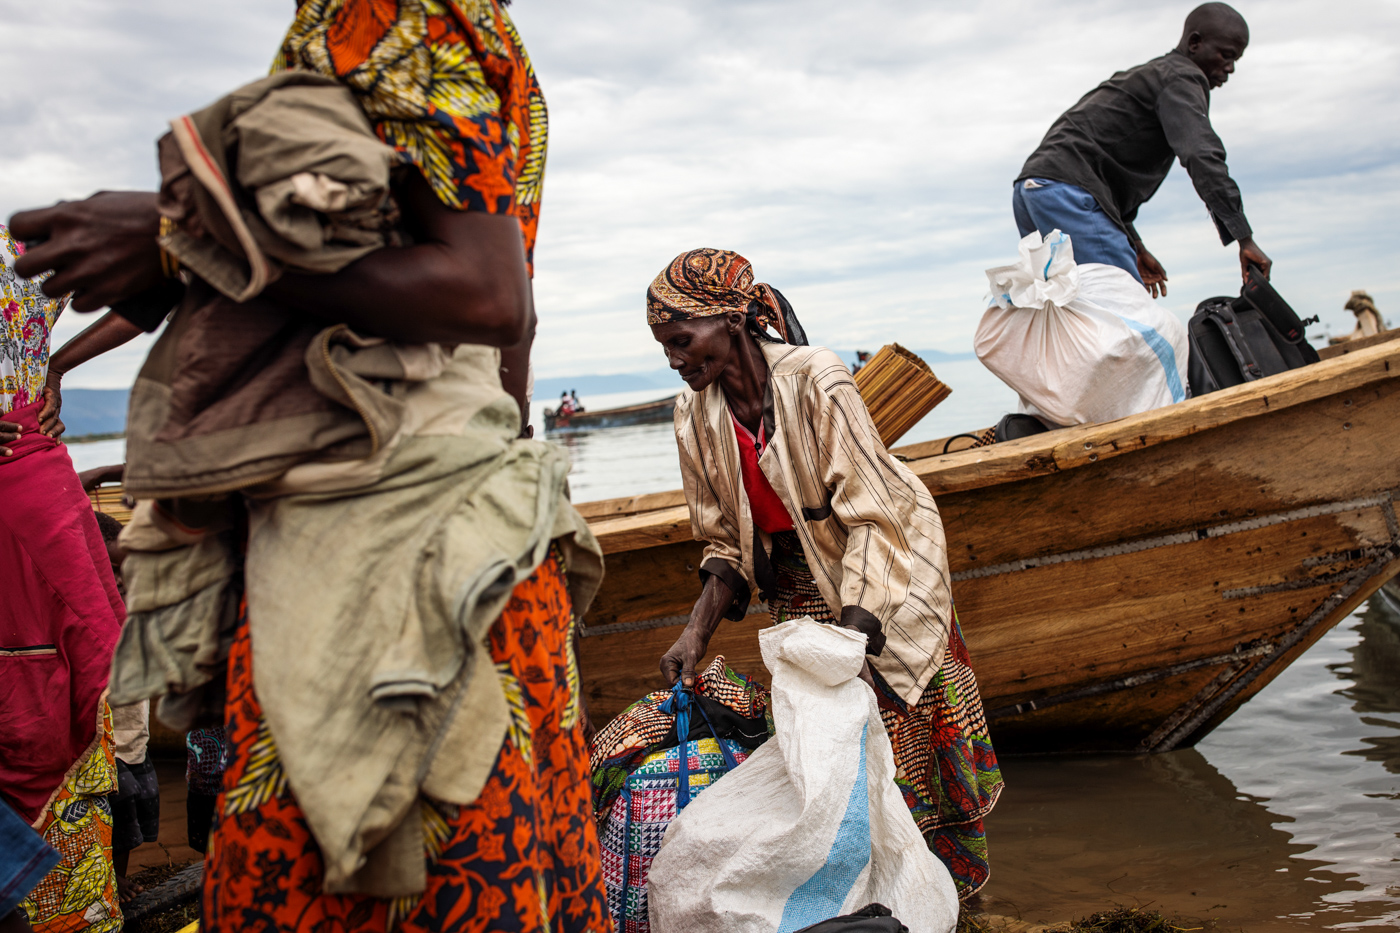  NSONGA, UGANDA: Refugees from Tchomia in the Democratic Republic of Congo gather their belongings as they arrive on boat at the Nsonga landing site on April 9, 2018. 